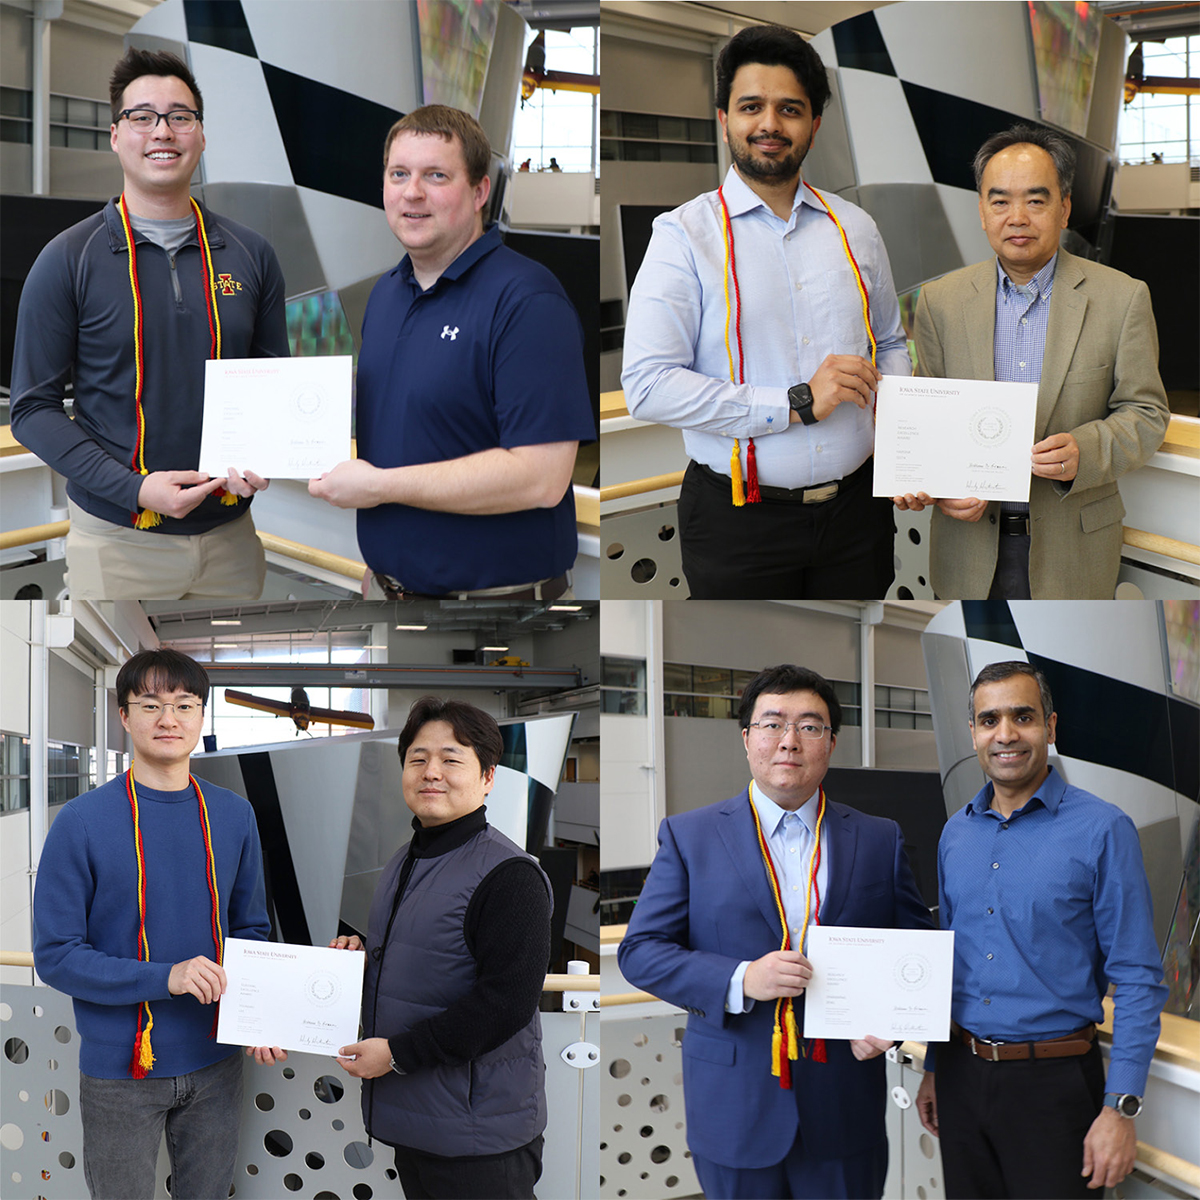 Four TEX-REX award recipients with their faculty nominators